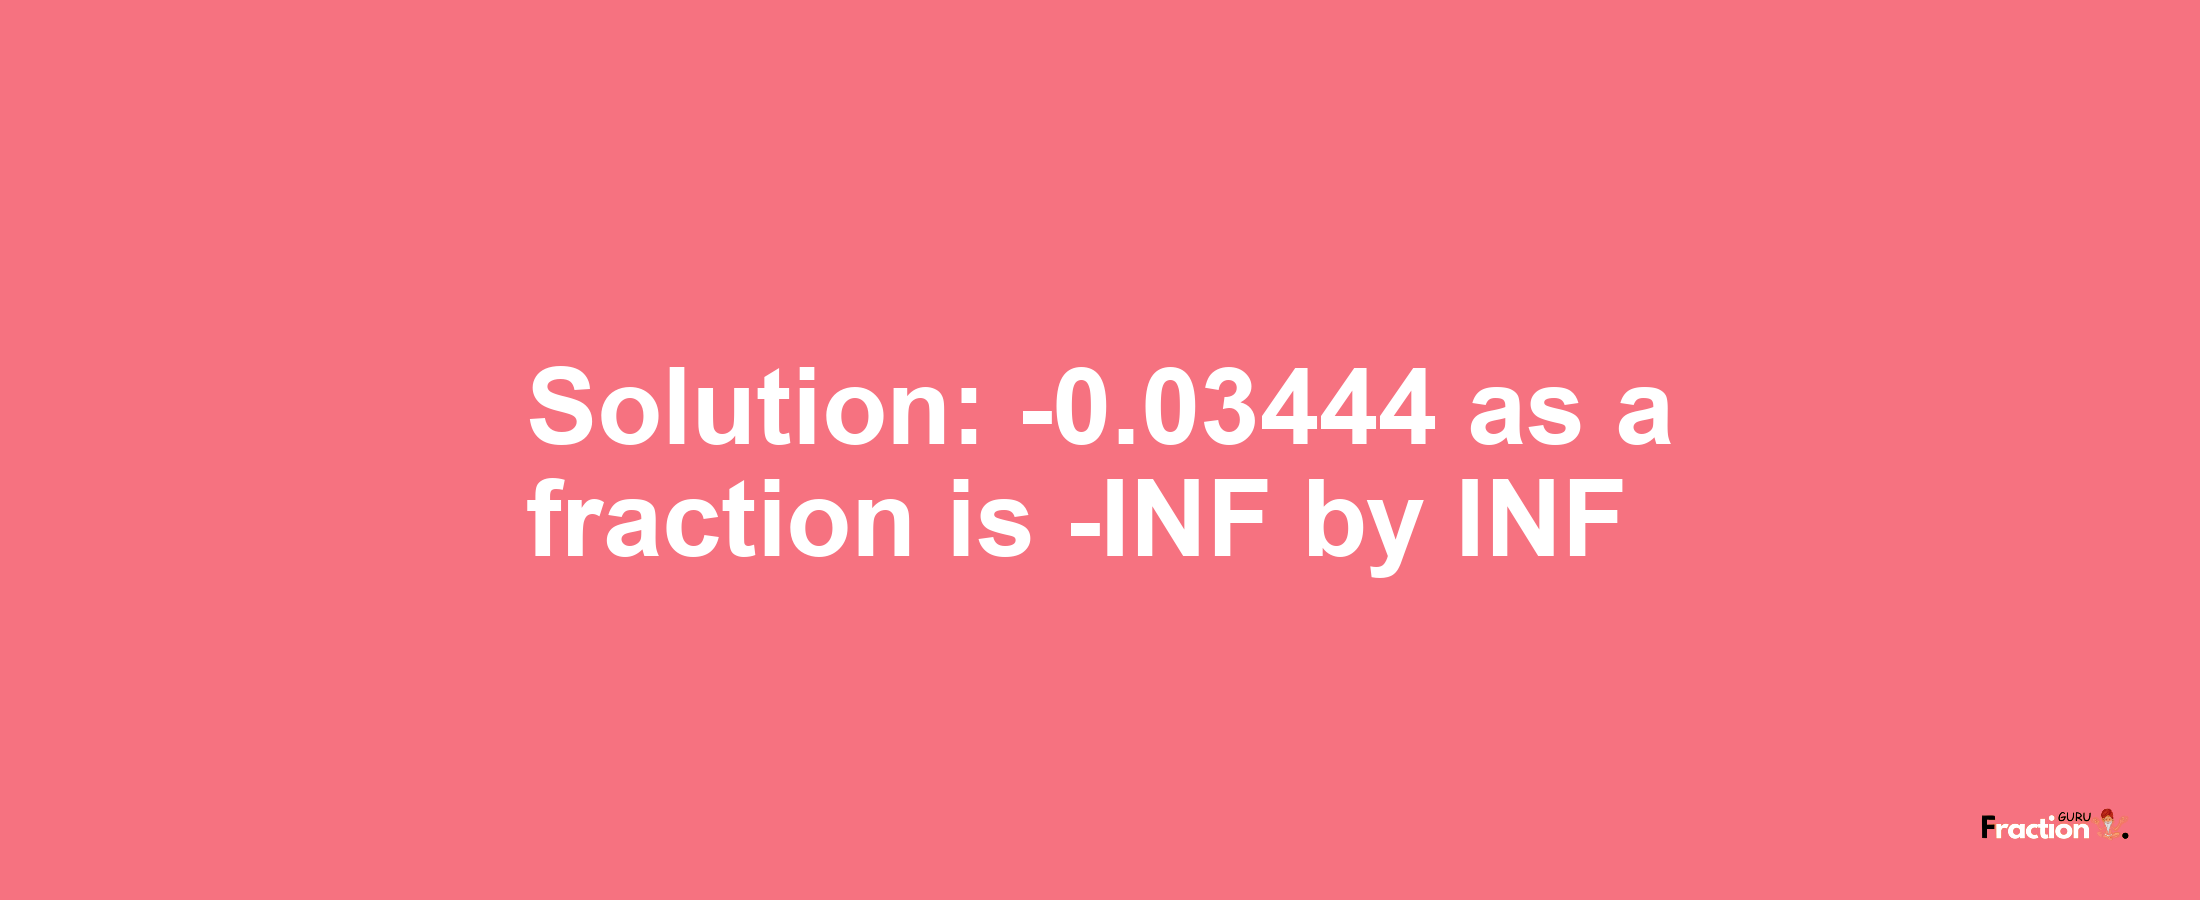 Solution:-0.03444 as a fraction is -INF/INF